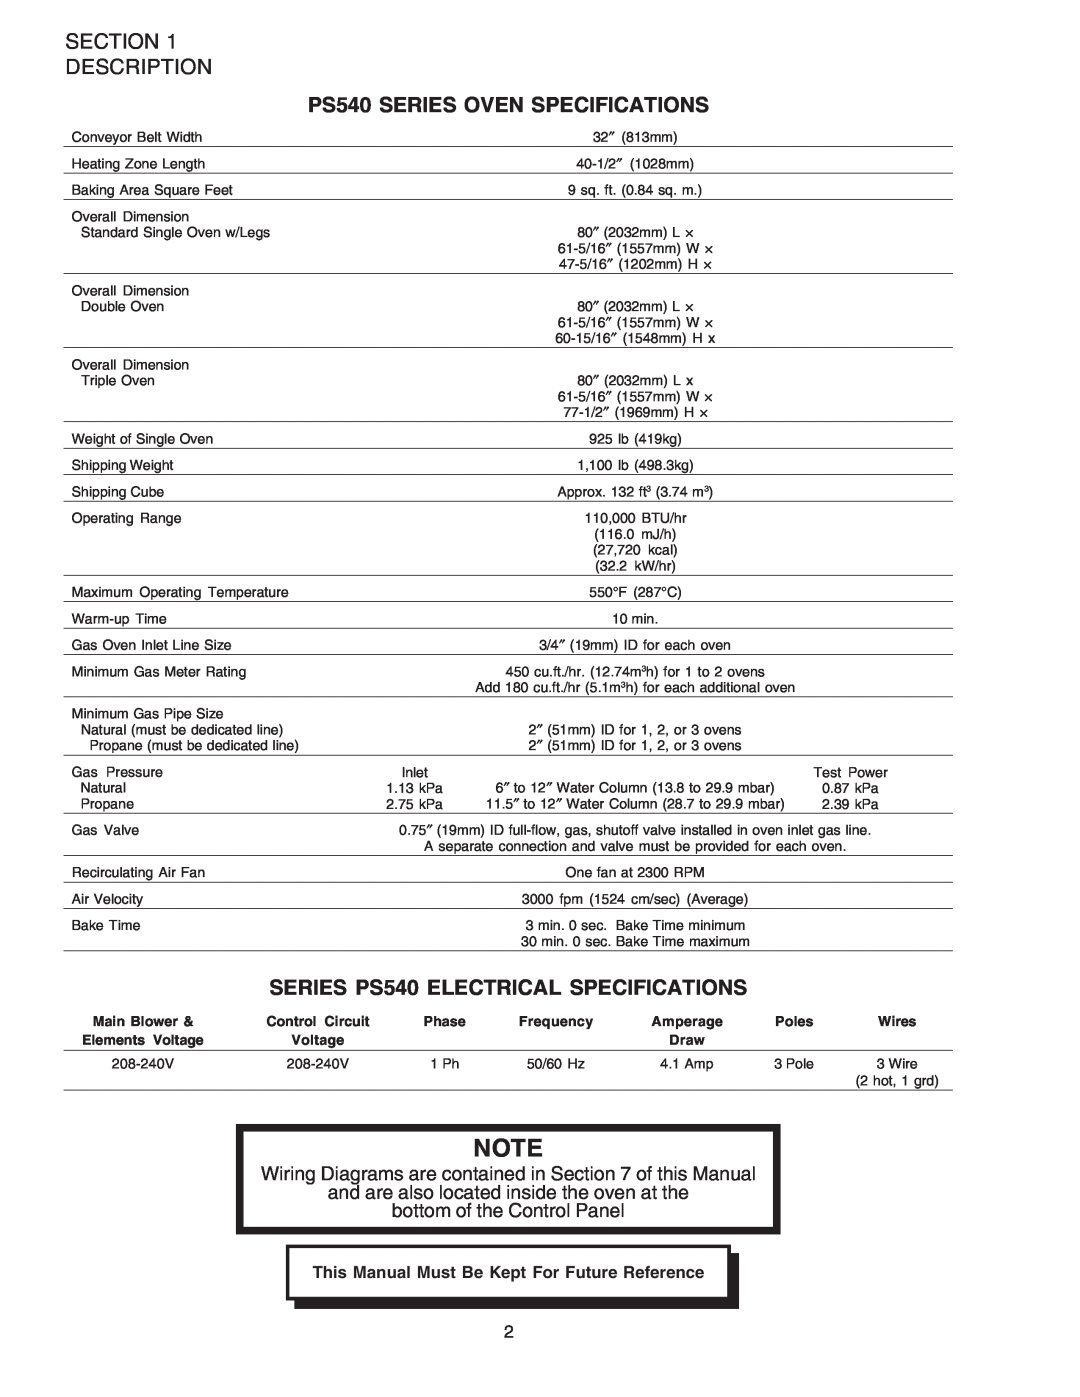 Middleby Marshall PS540G Section Description, PS540 SERIES OVEN SPECIFICATIONS, SERIES PS540 ELECTRICAL SPECIFICATIONS 